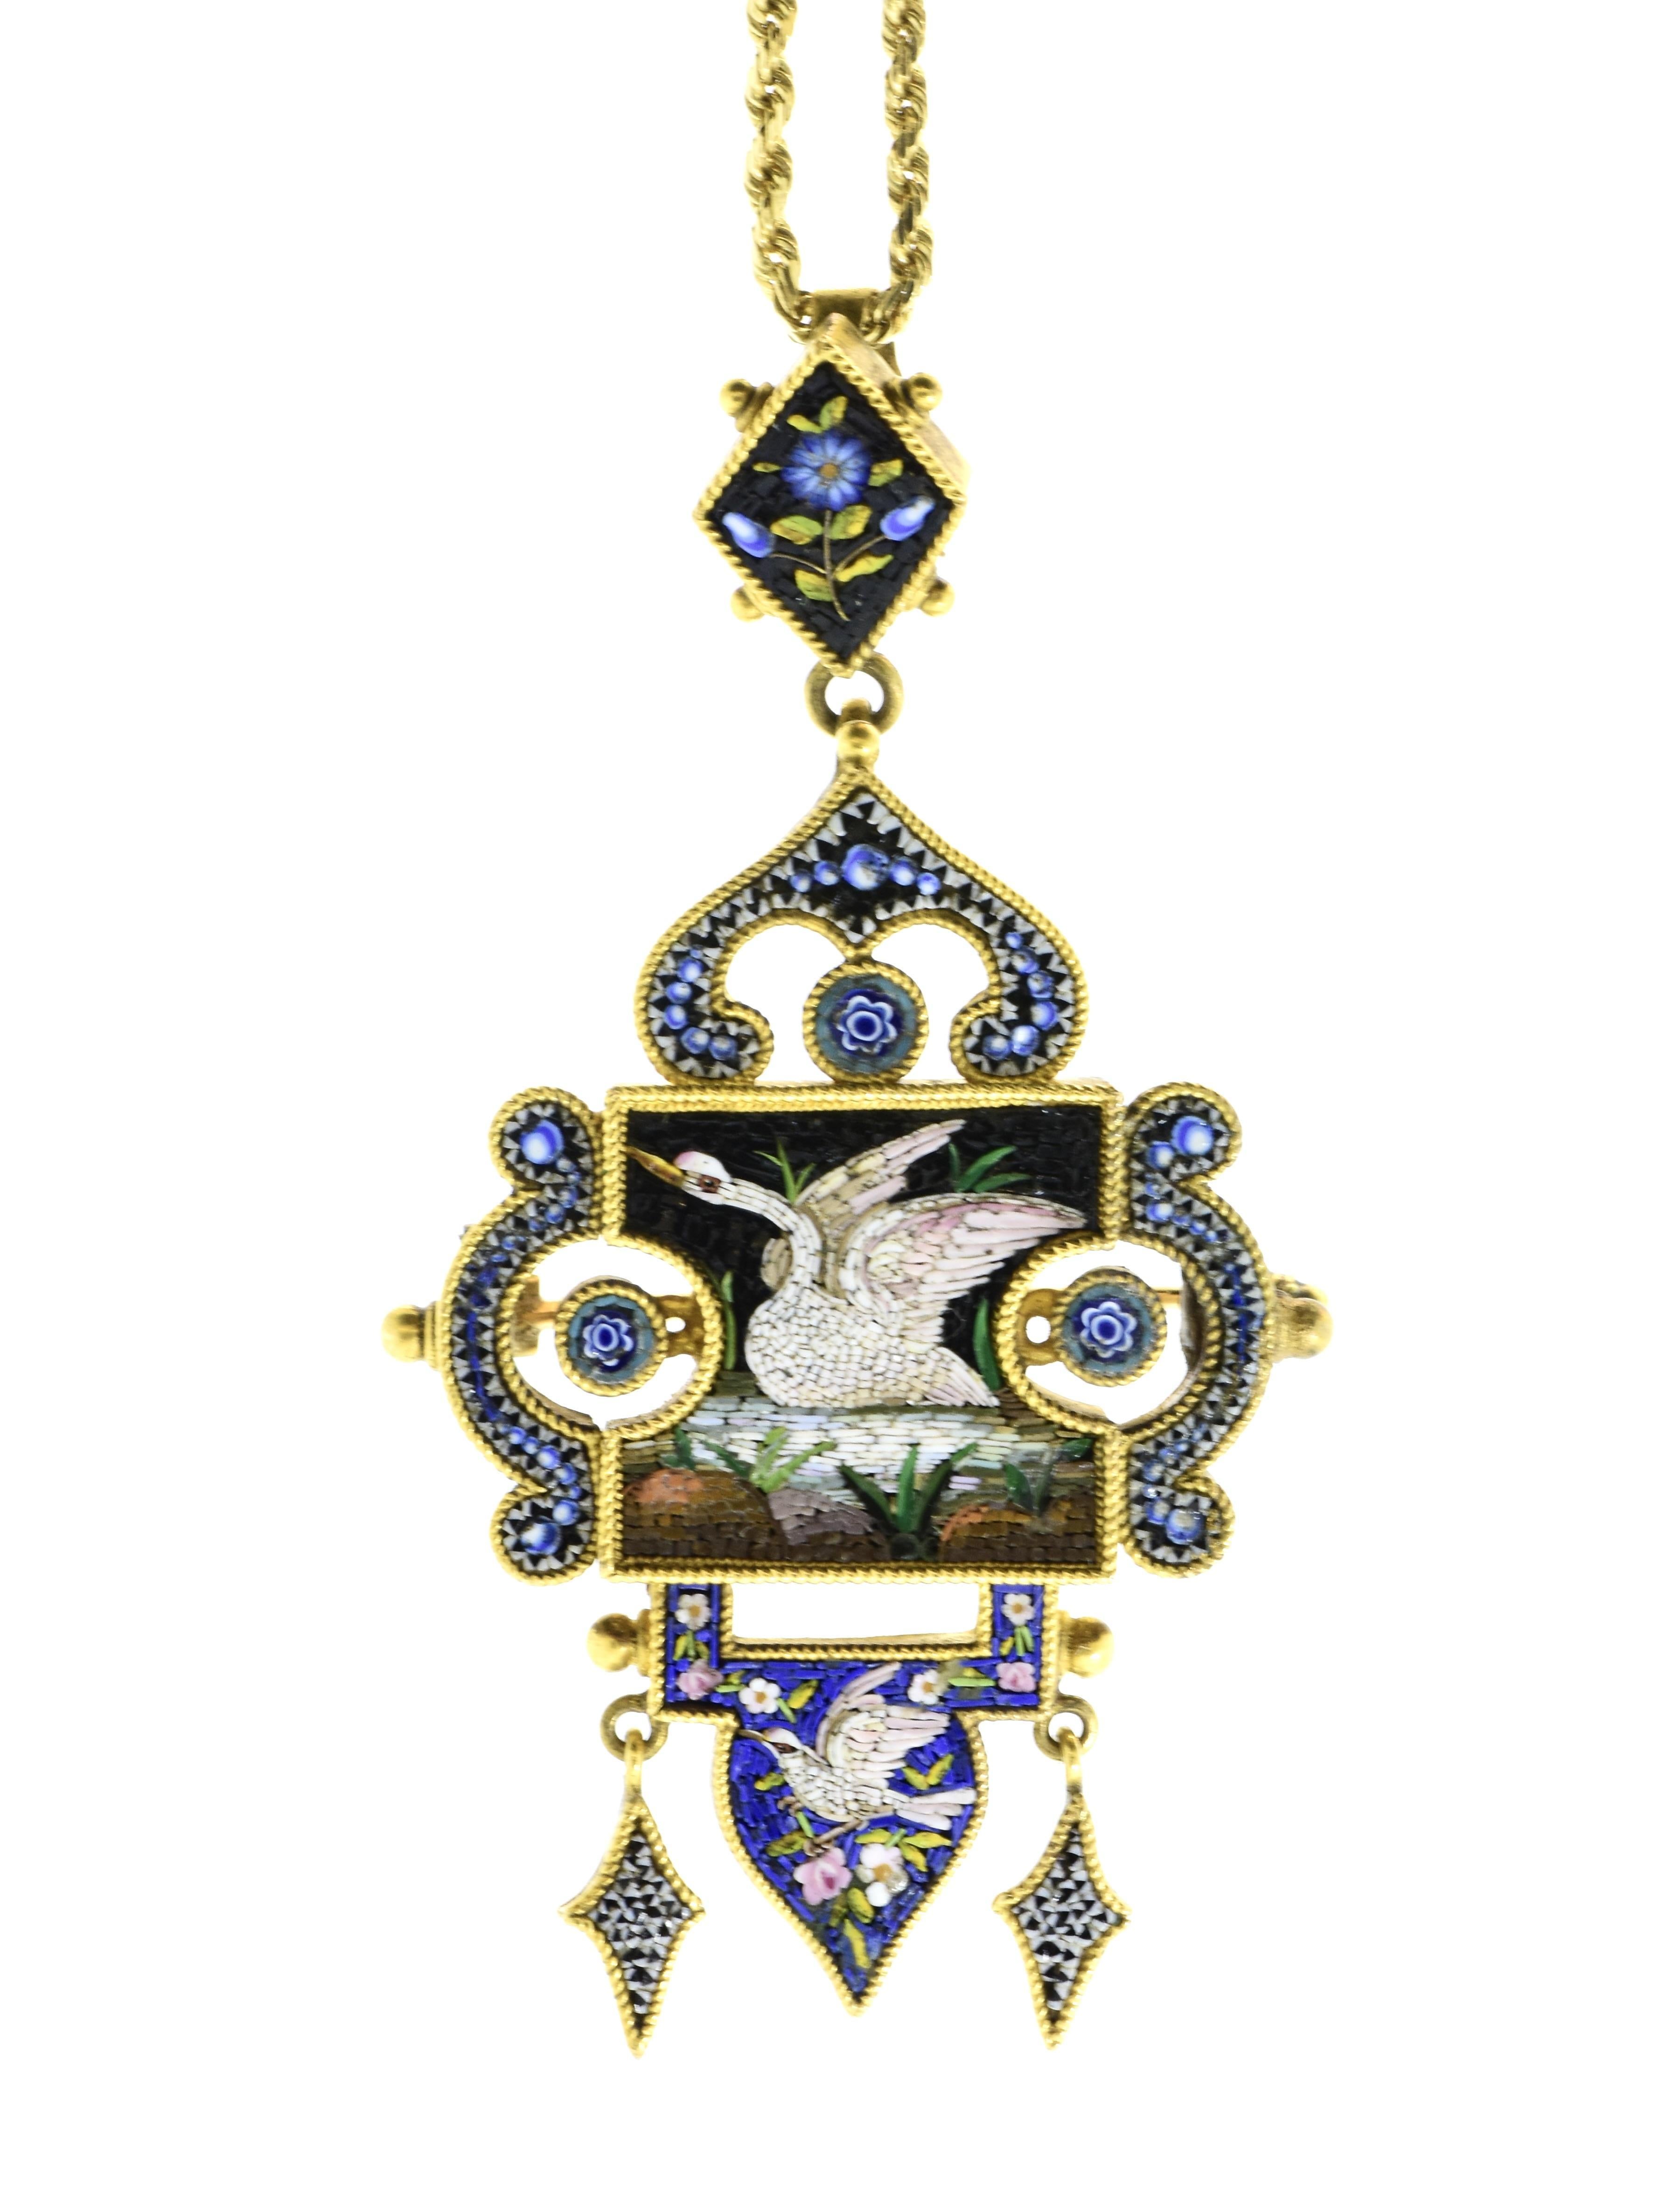 Antique Micro Mosaic 18K Pendant and Brooch, c. 1880 For Sale 2